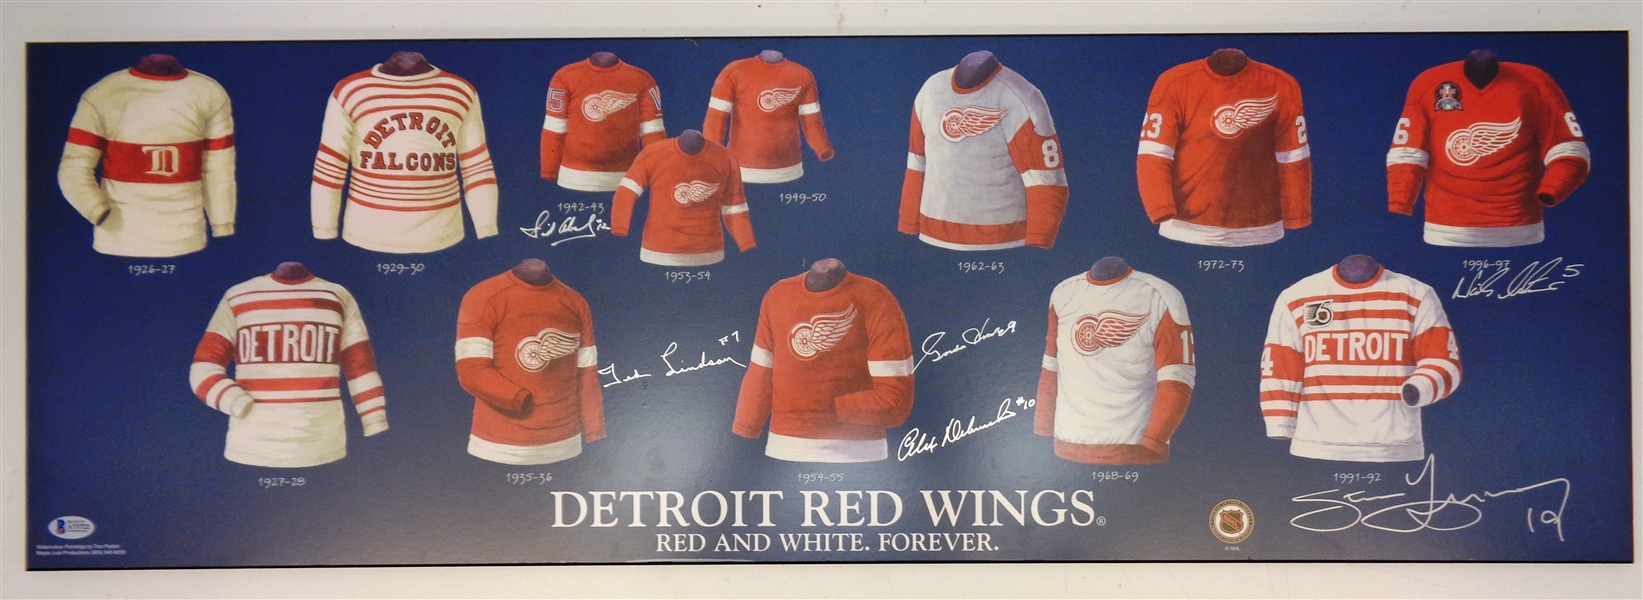 Red Wings 12x36 Plaque Signed by 6 HOFers